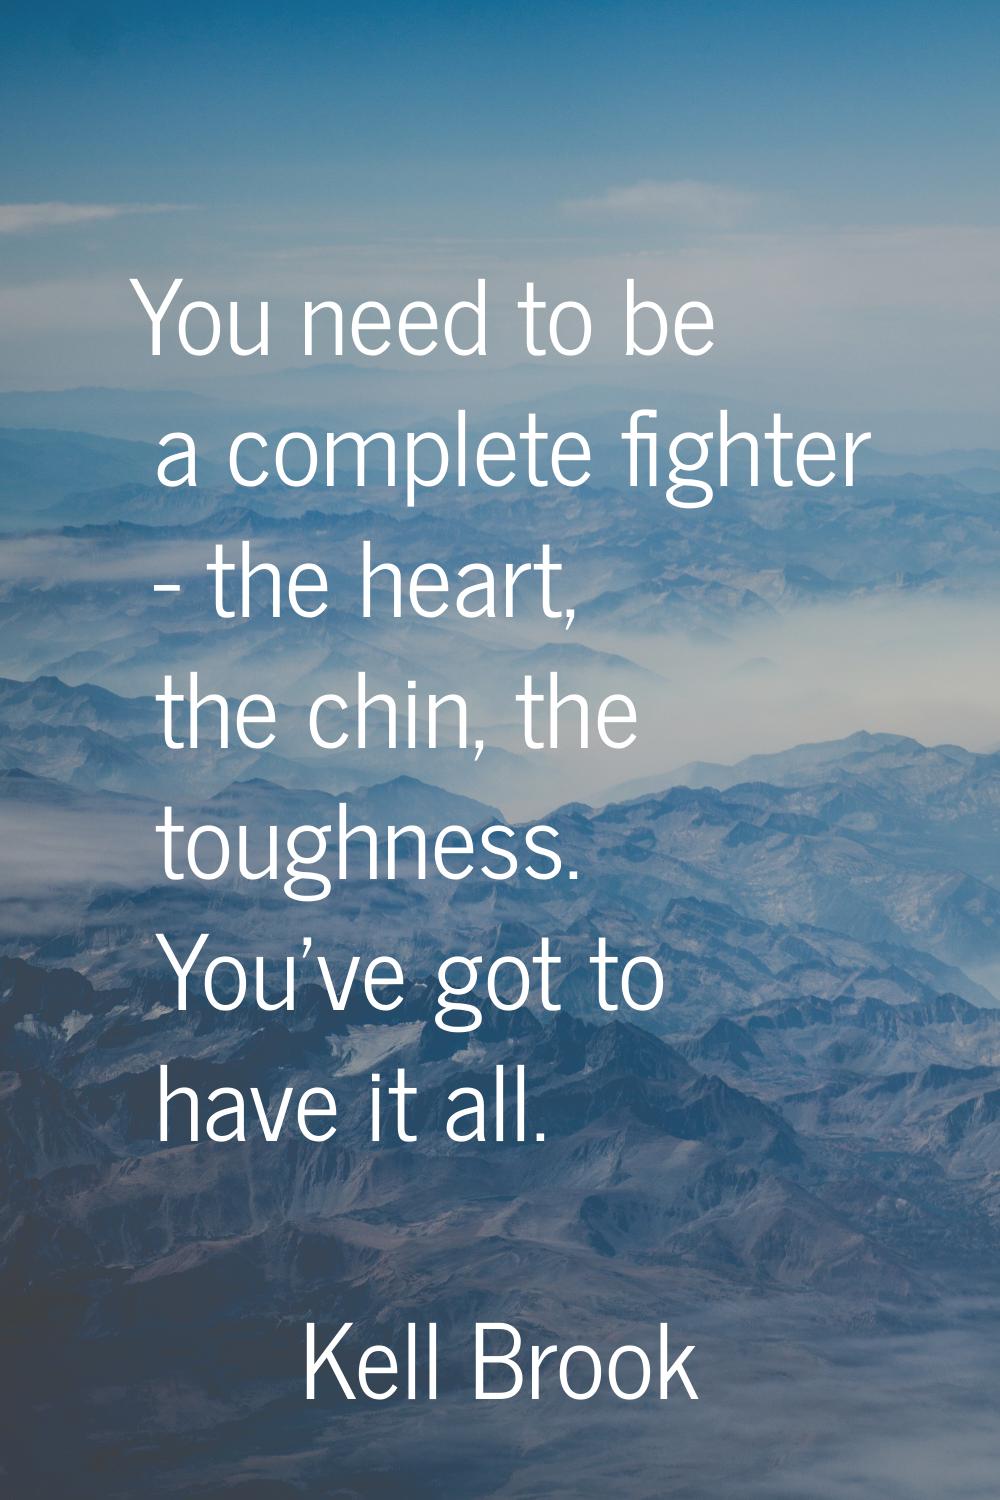 You need to be a complete fighter - the heart, the chin, the toughness. You've got to have it all.